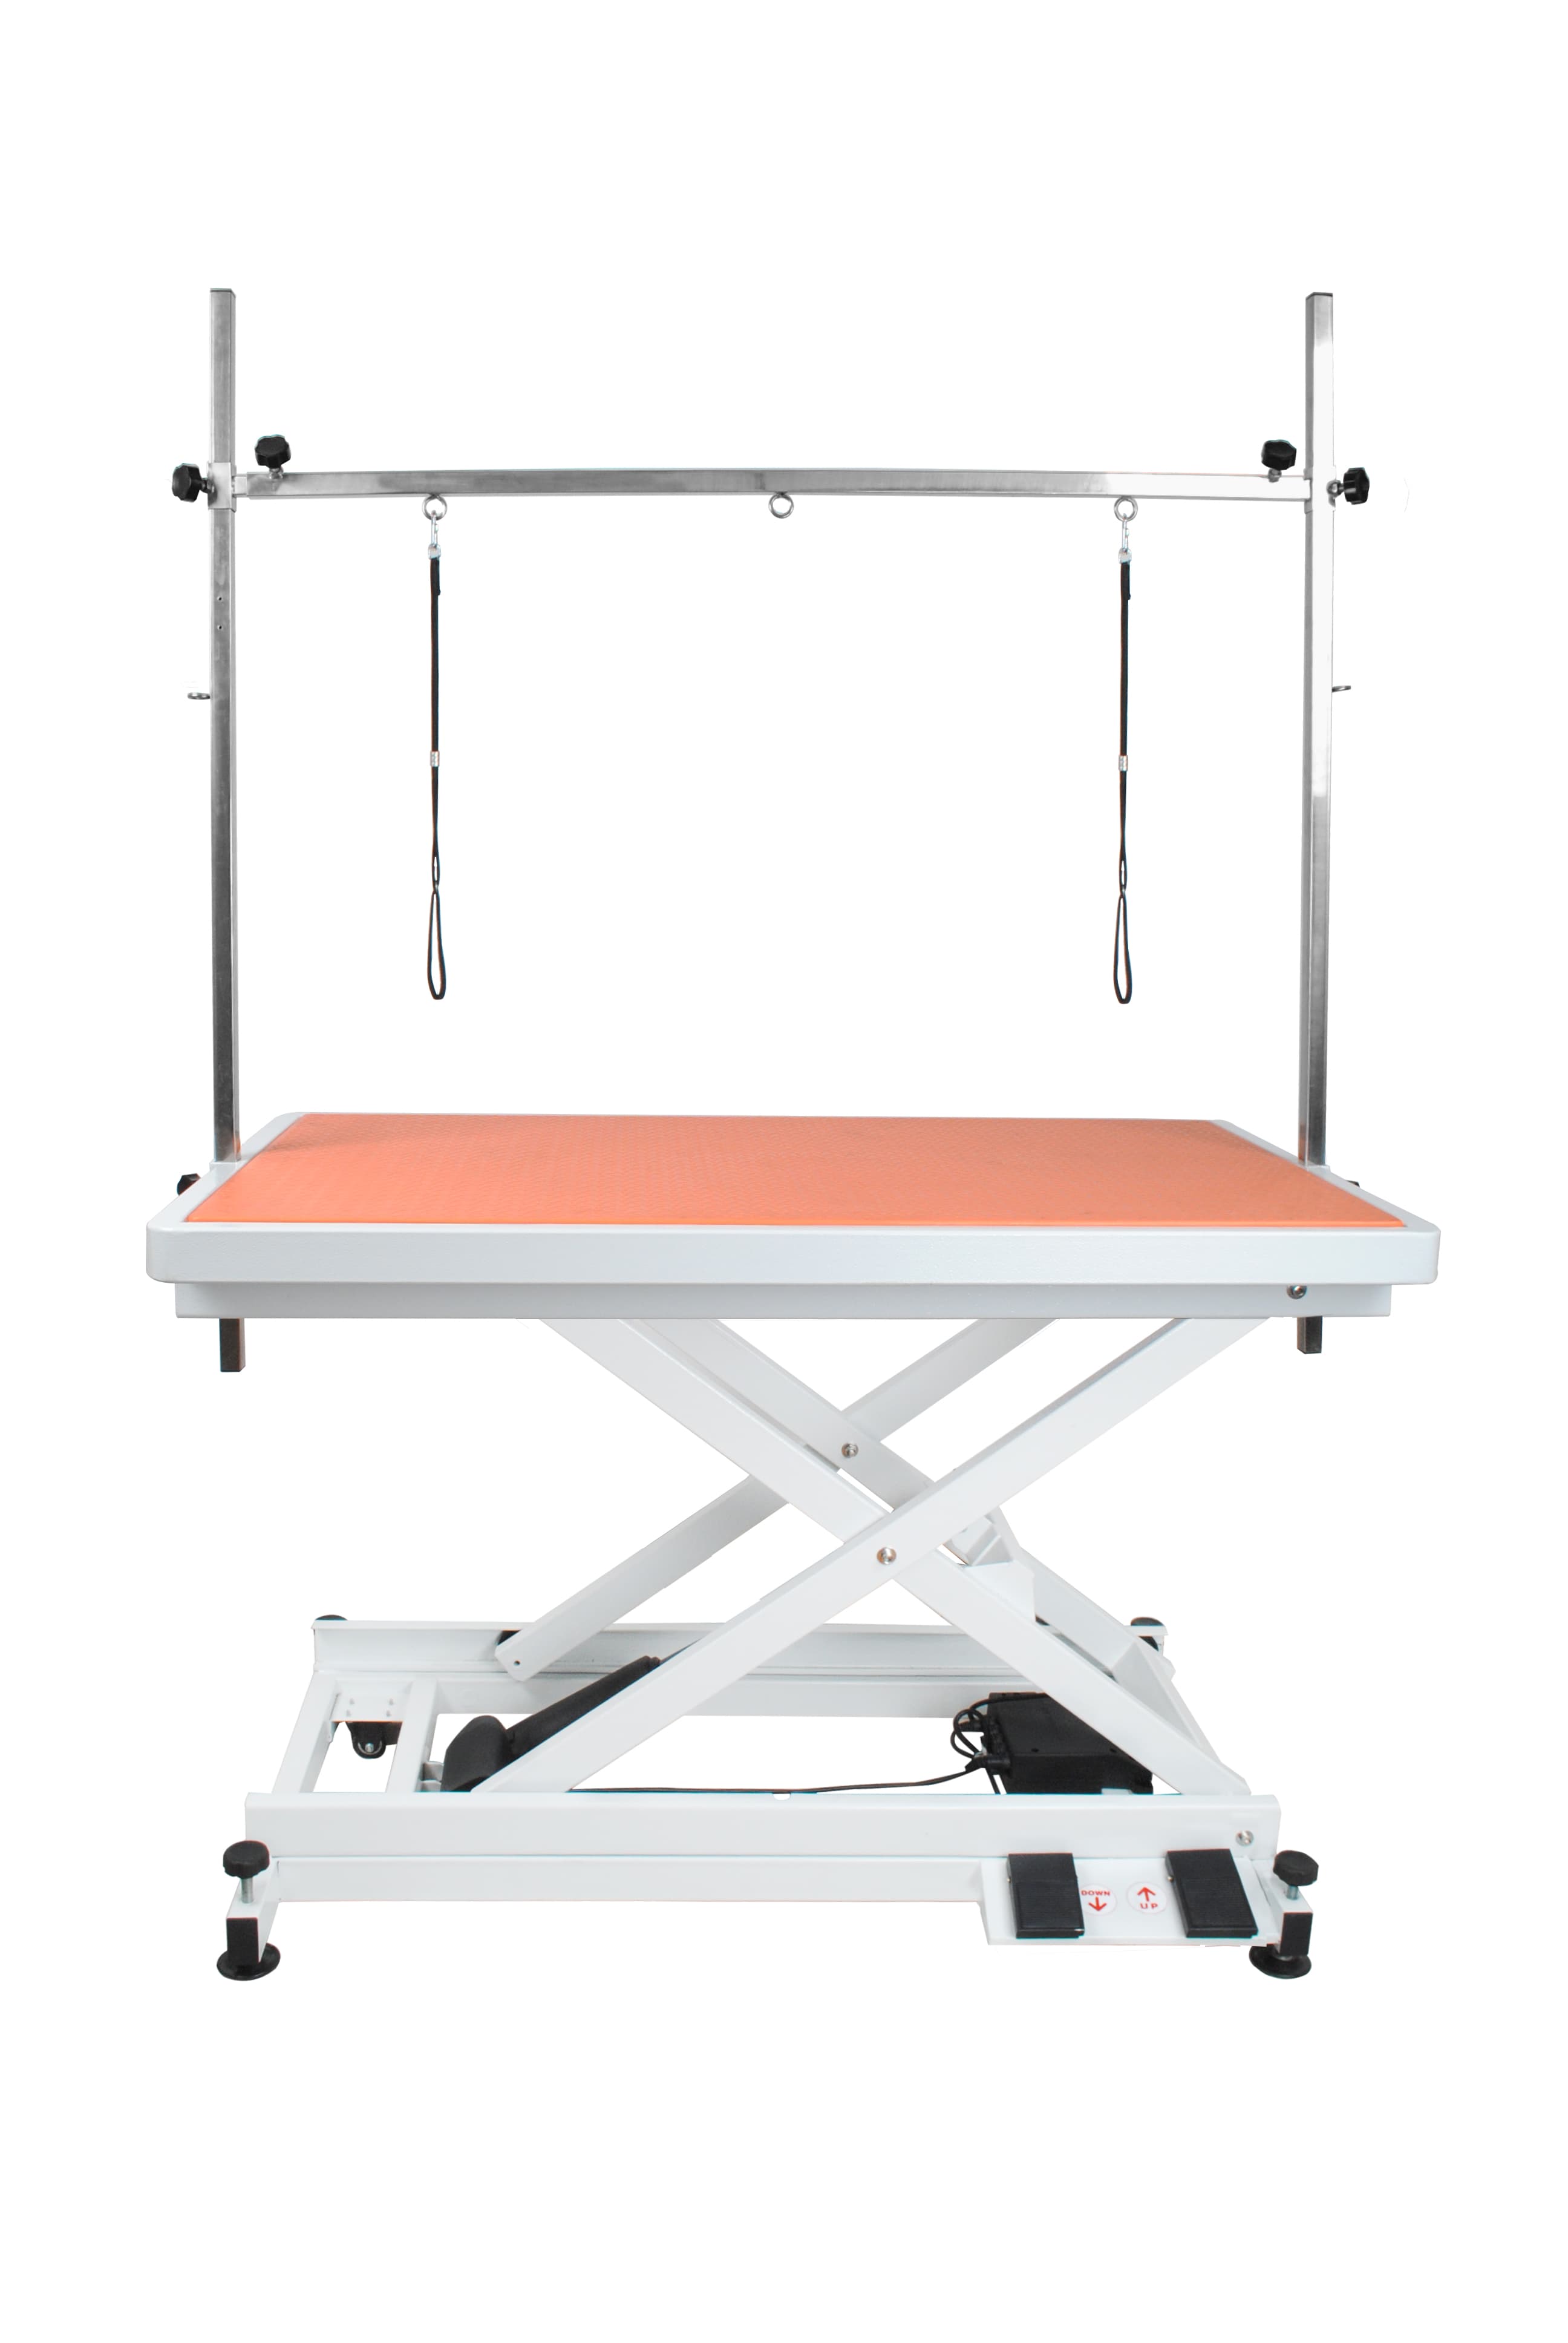 NutraPet Grooming Tables 117cm x 66 cm Electrical Table